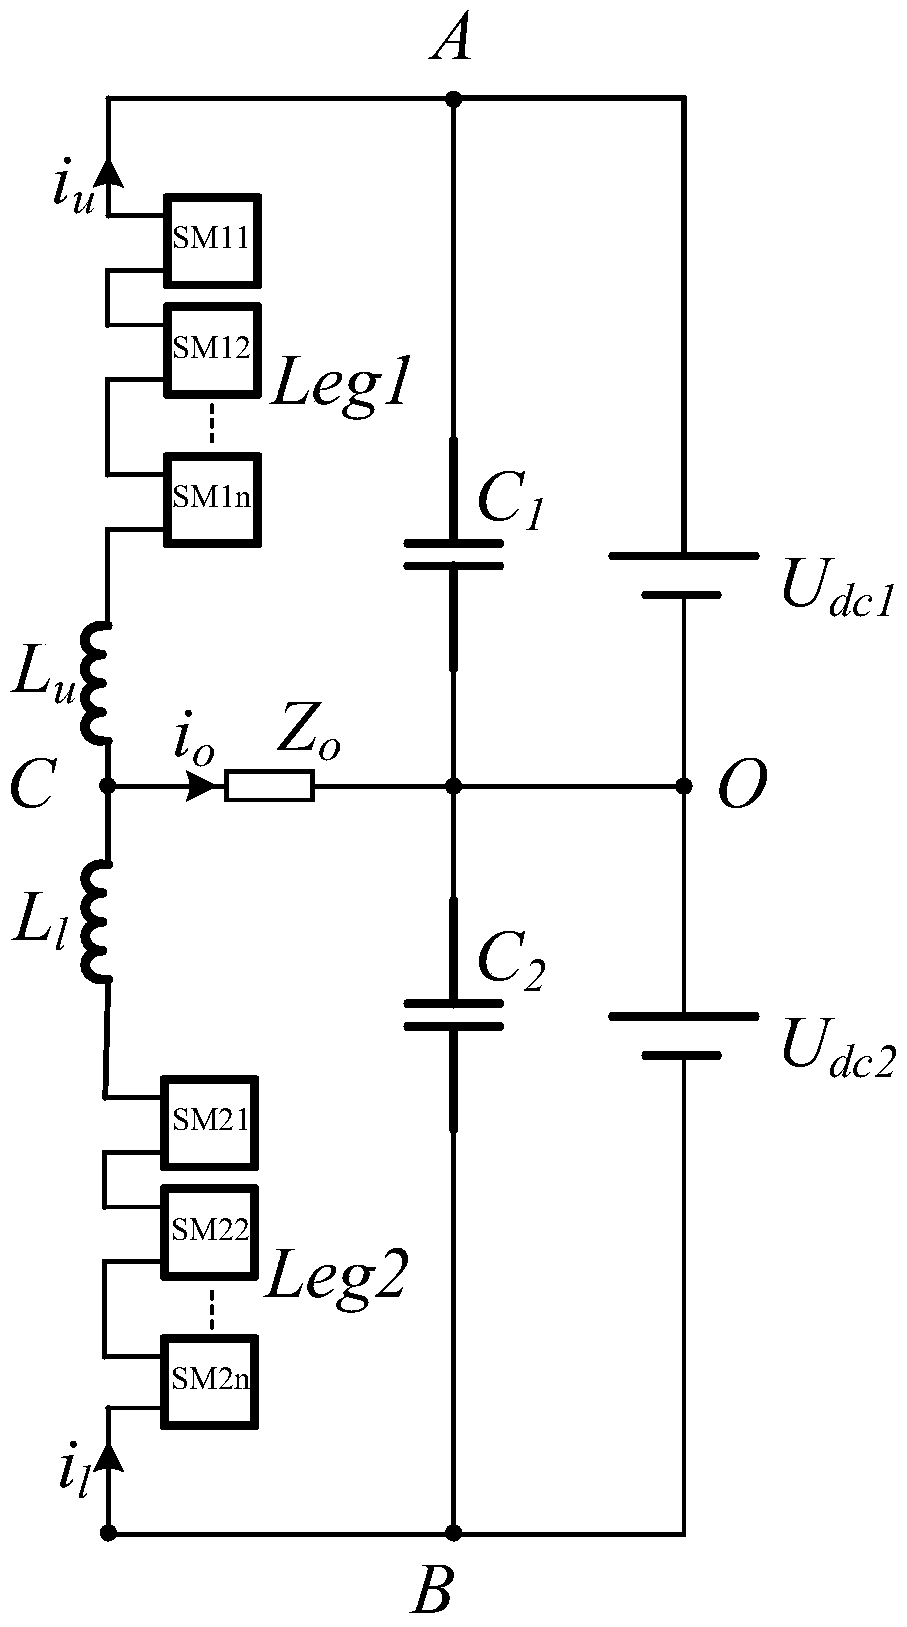 A modular multilevel converter single-phase inverter test circuit and its test method